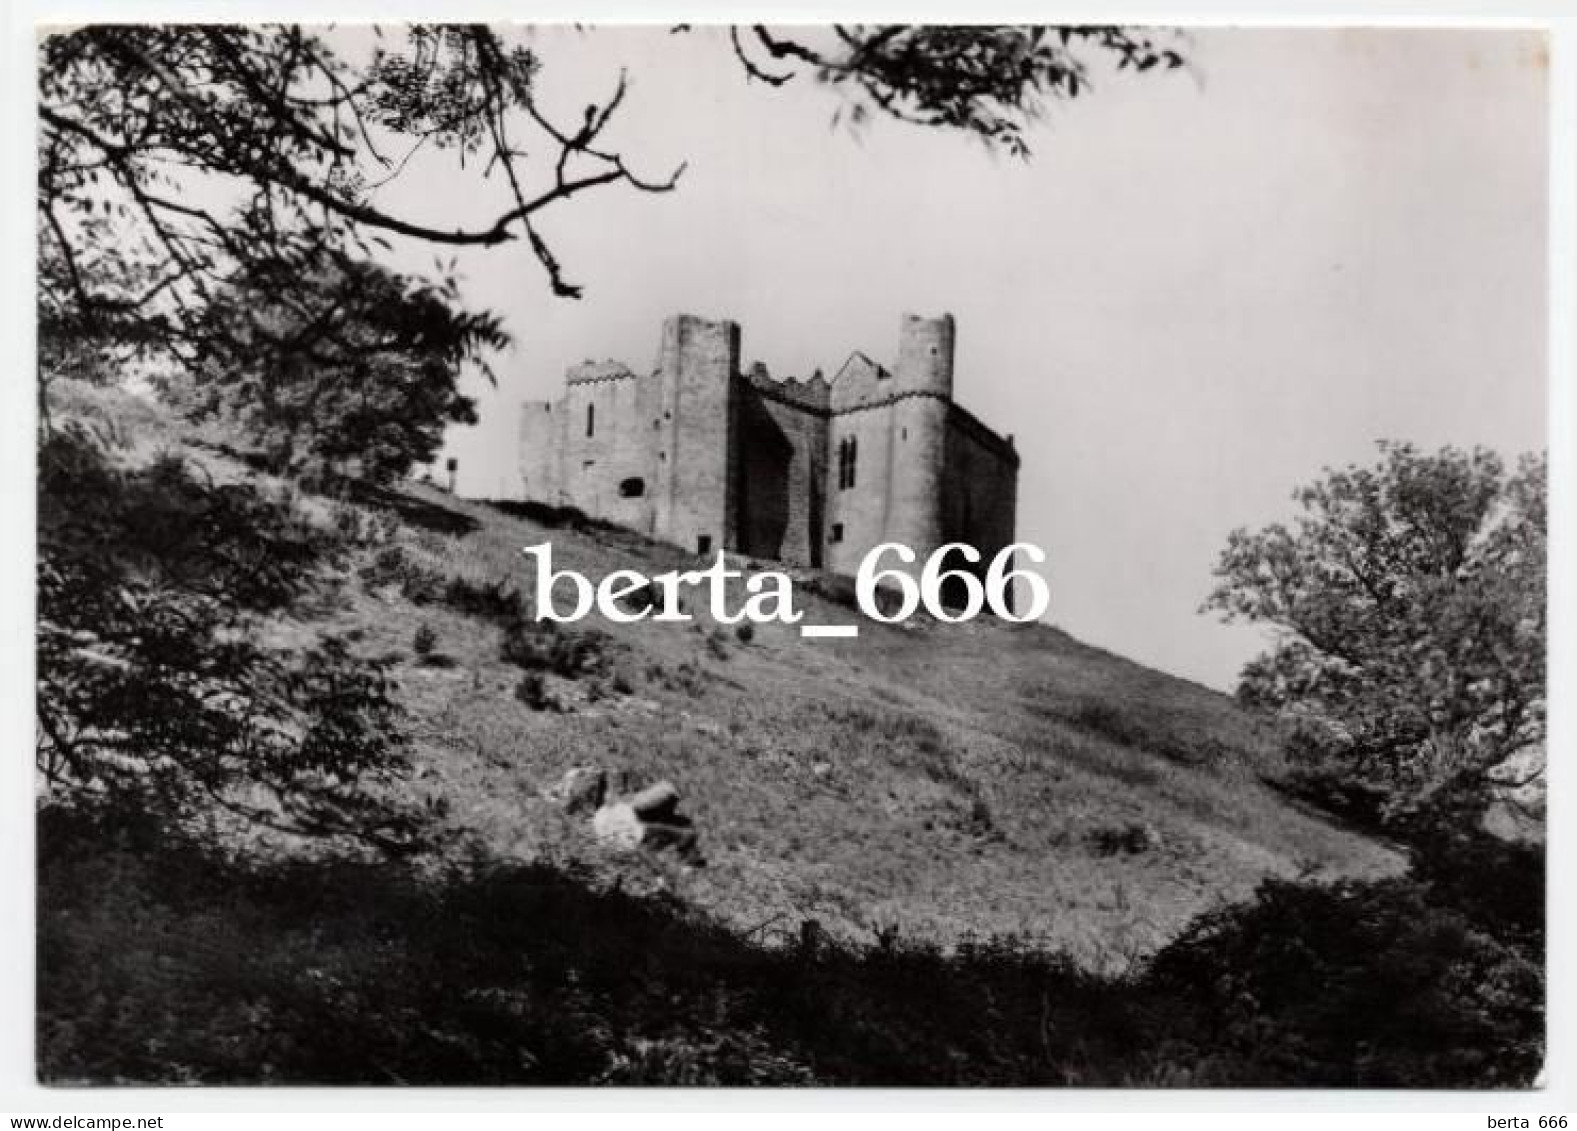 Wales Weobley Castle Gower Real Photo - Glamorgan